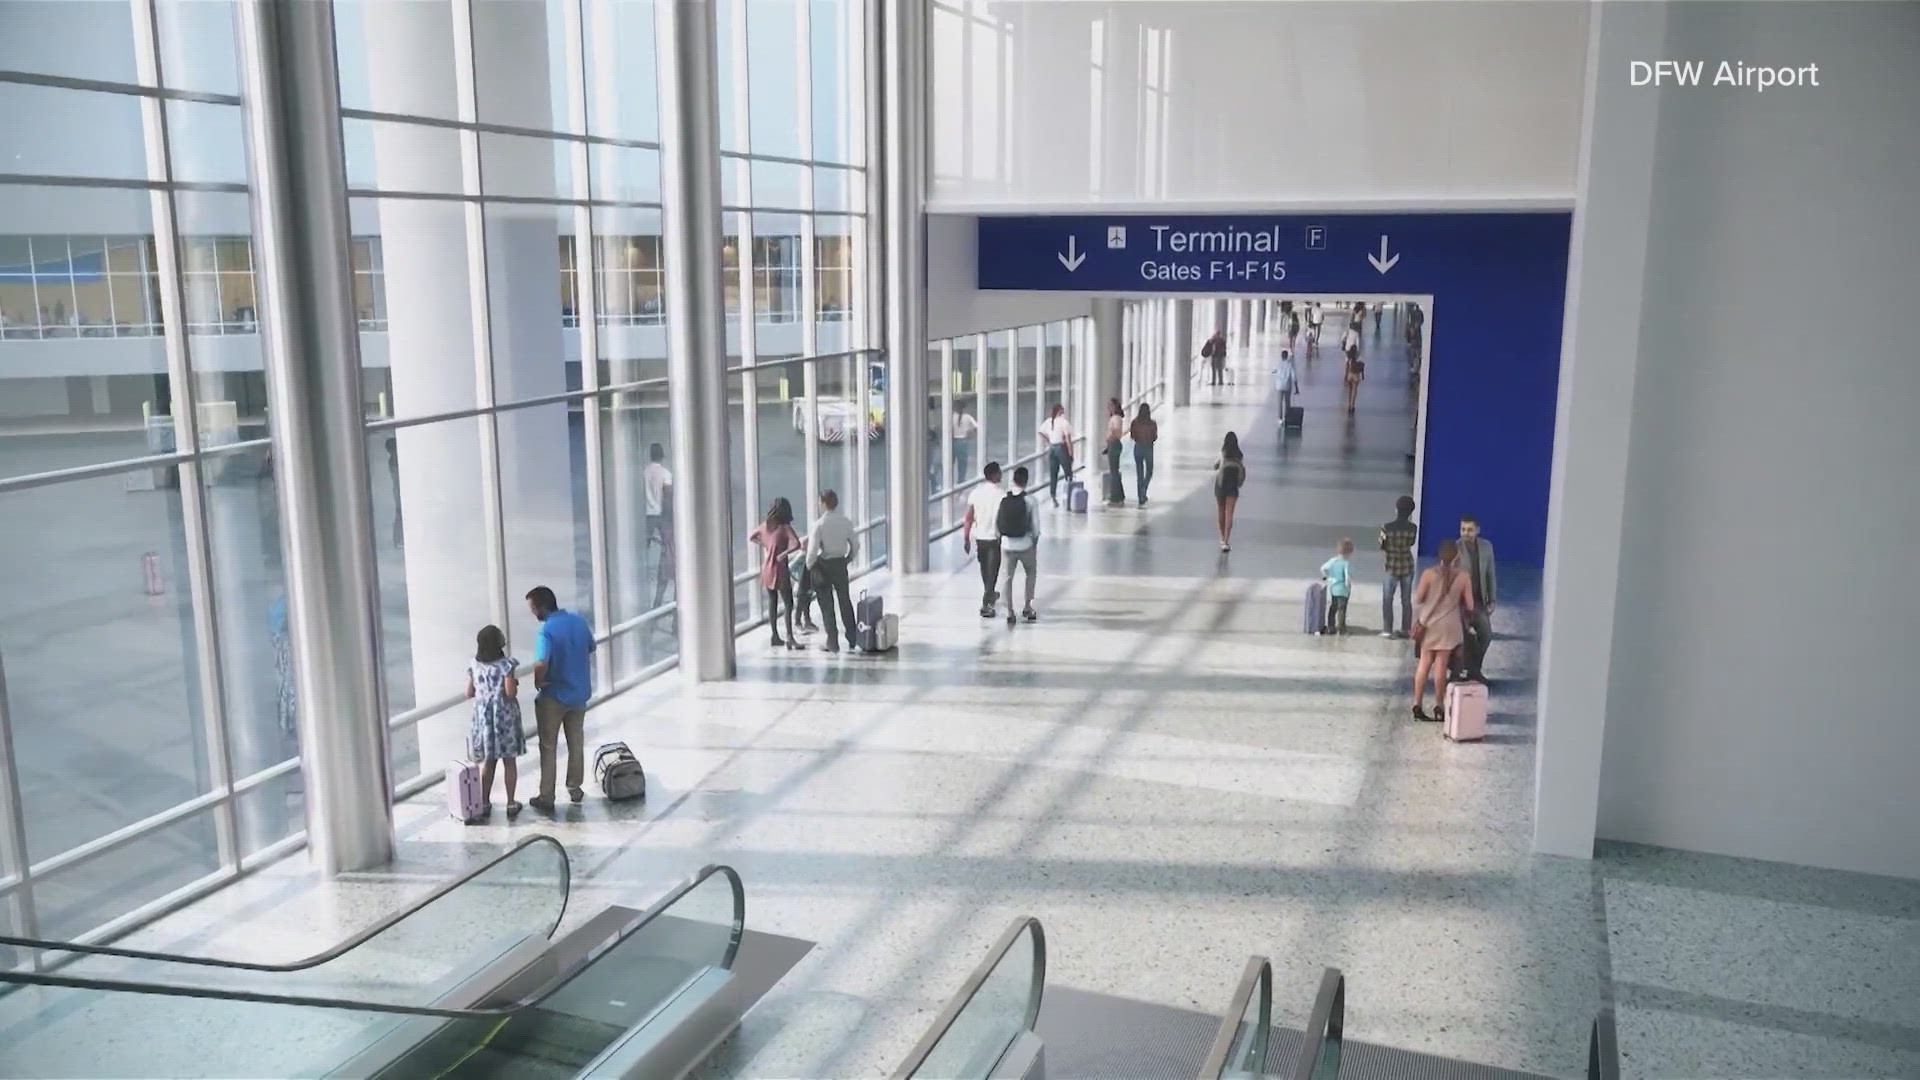 The airport’s board and operations committee Thursday approved a contract with Innovation Next+ of Irving for design and construction of the new terminal.